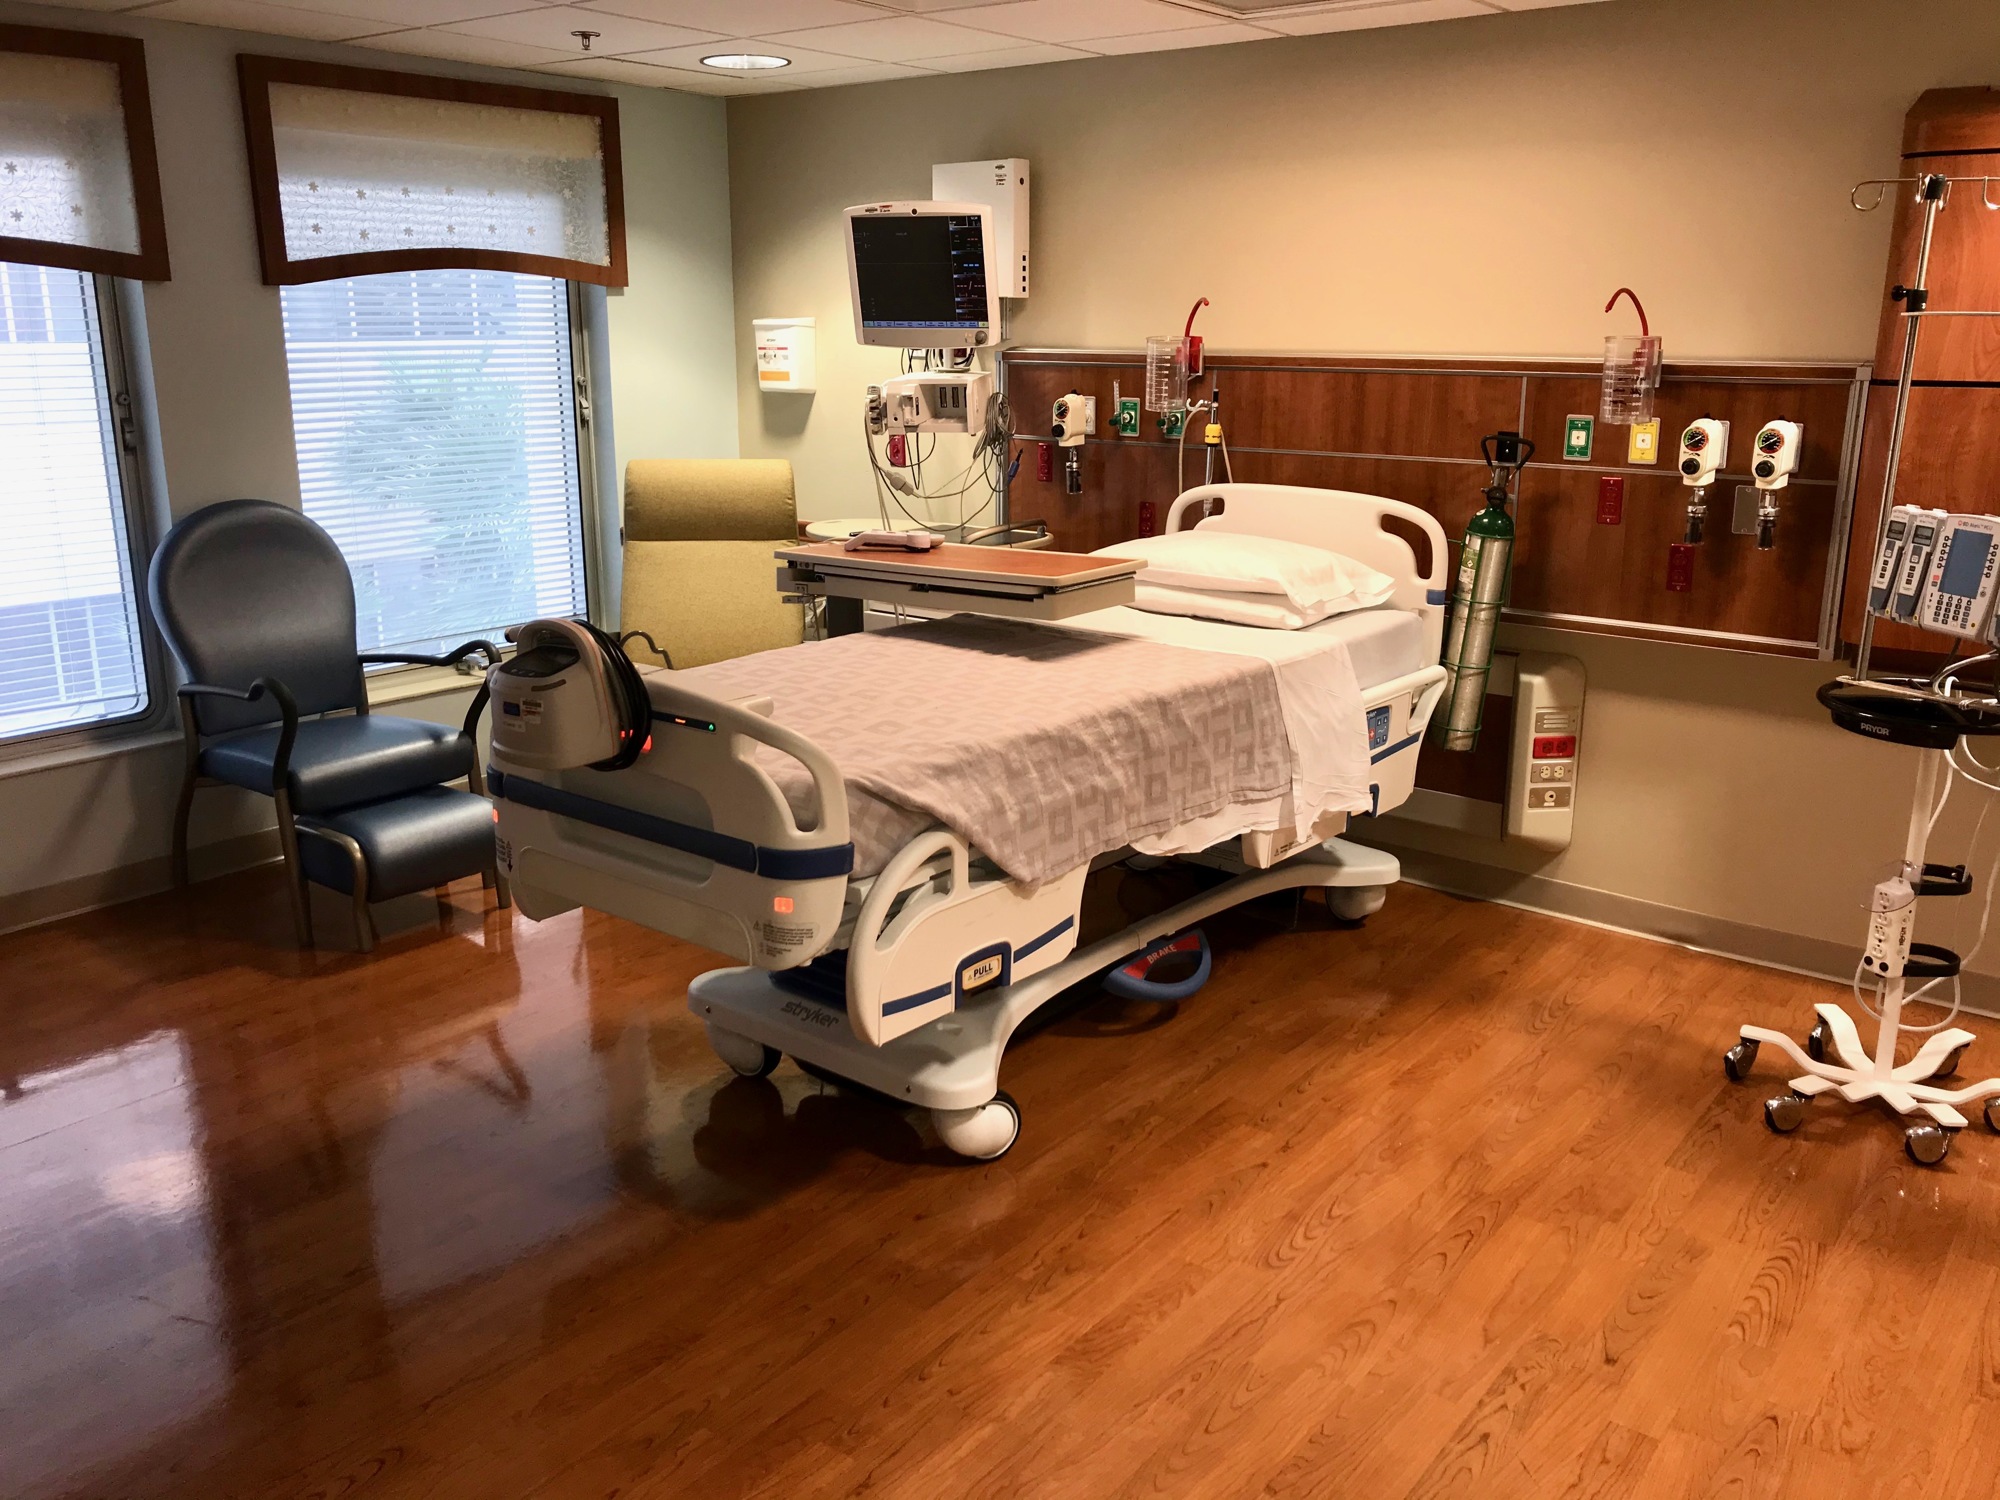 One of 18 rooms in the Memorial Hospital cardiovascular intensive care unit.